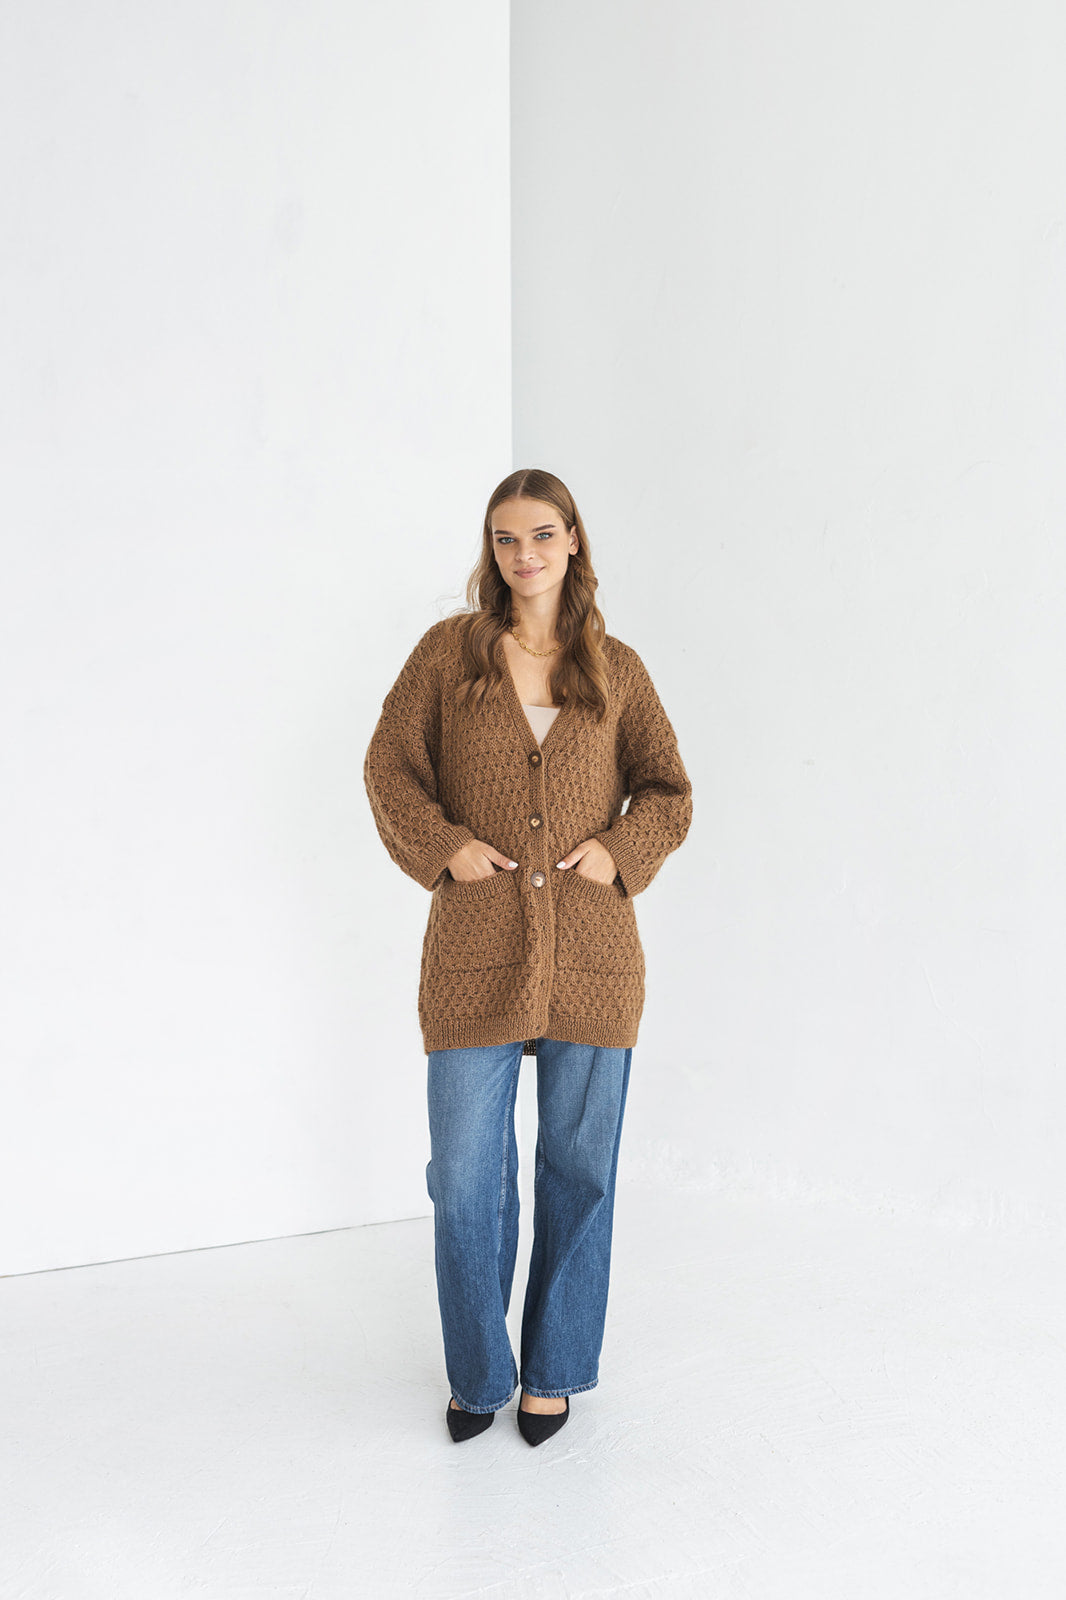 Long camel brown mohair cardigan with pockets, taupe fluffy cable knit alpaca blend sweater with buttons, thick fuzzy chunky knitted jacket